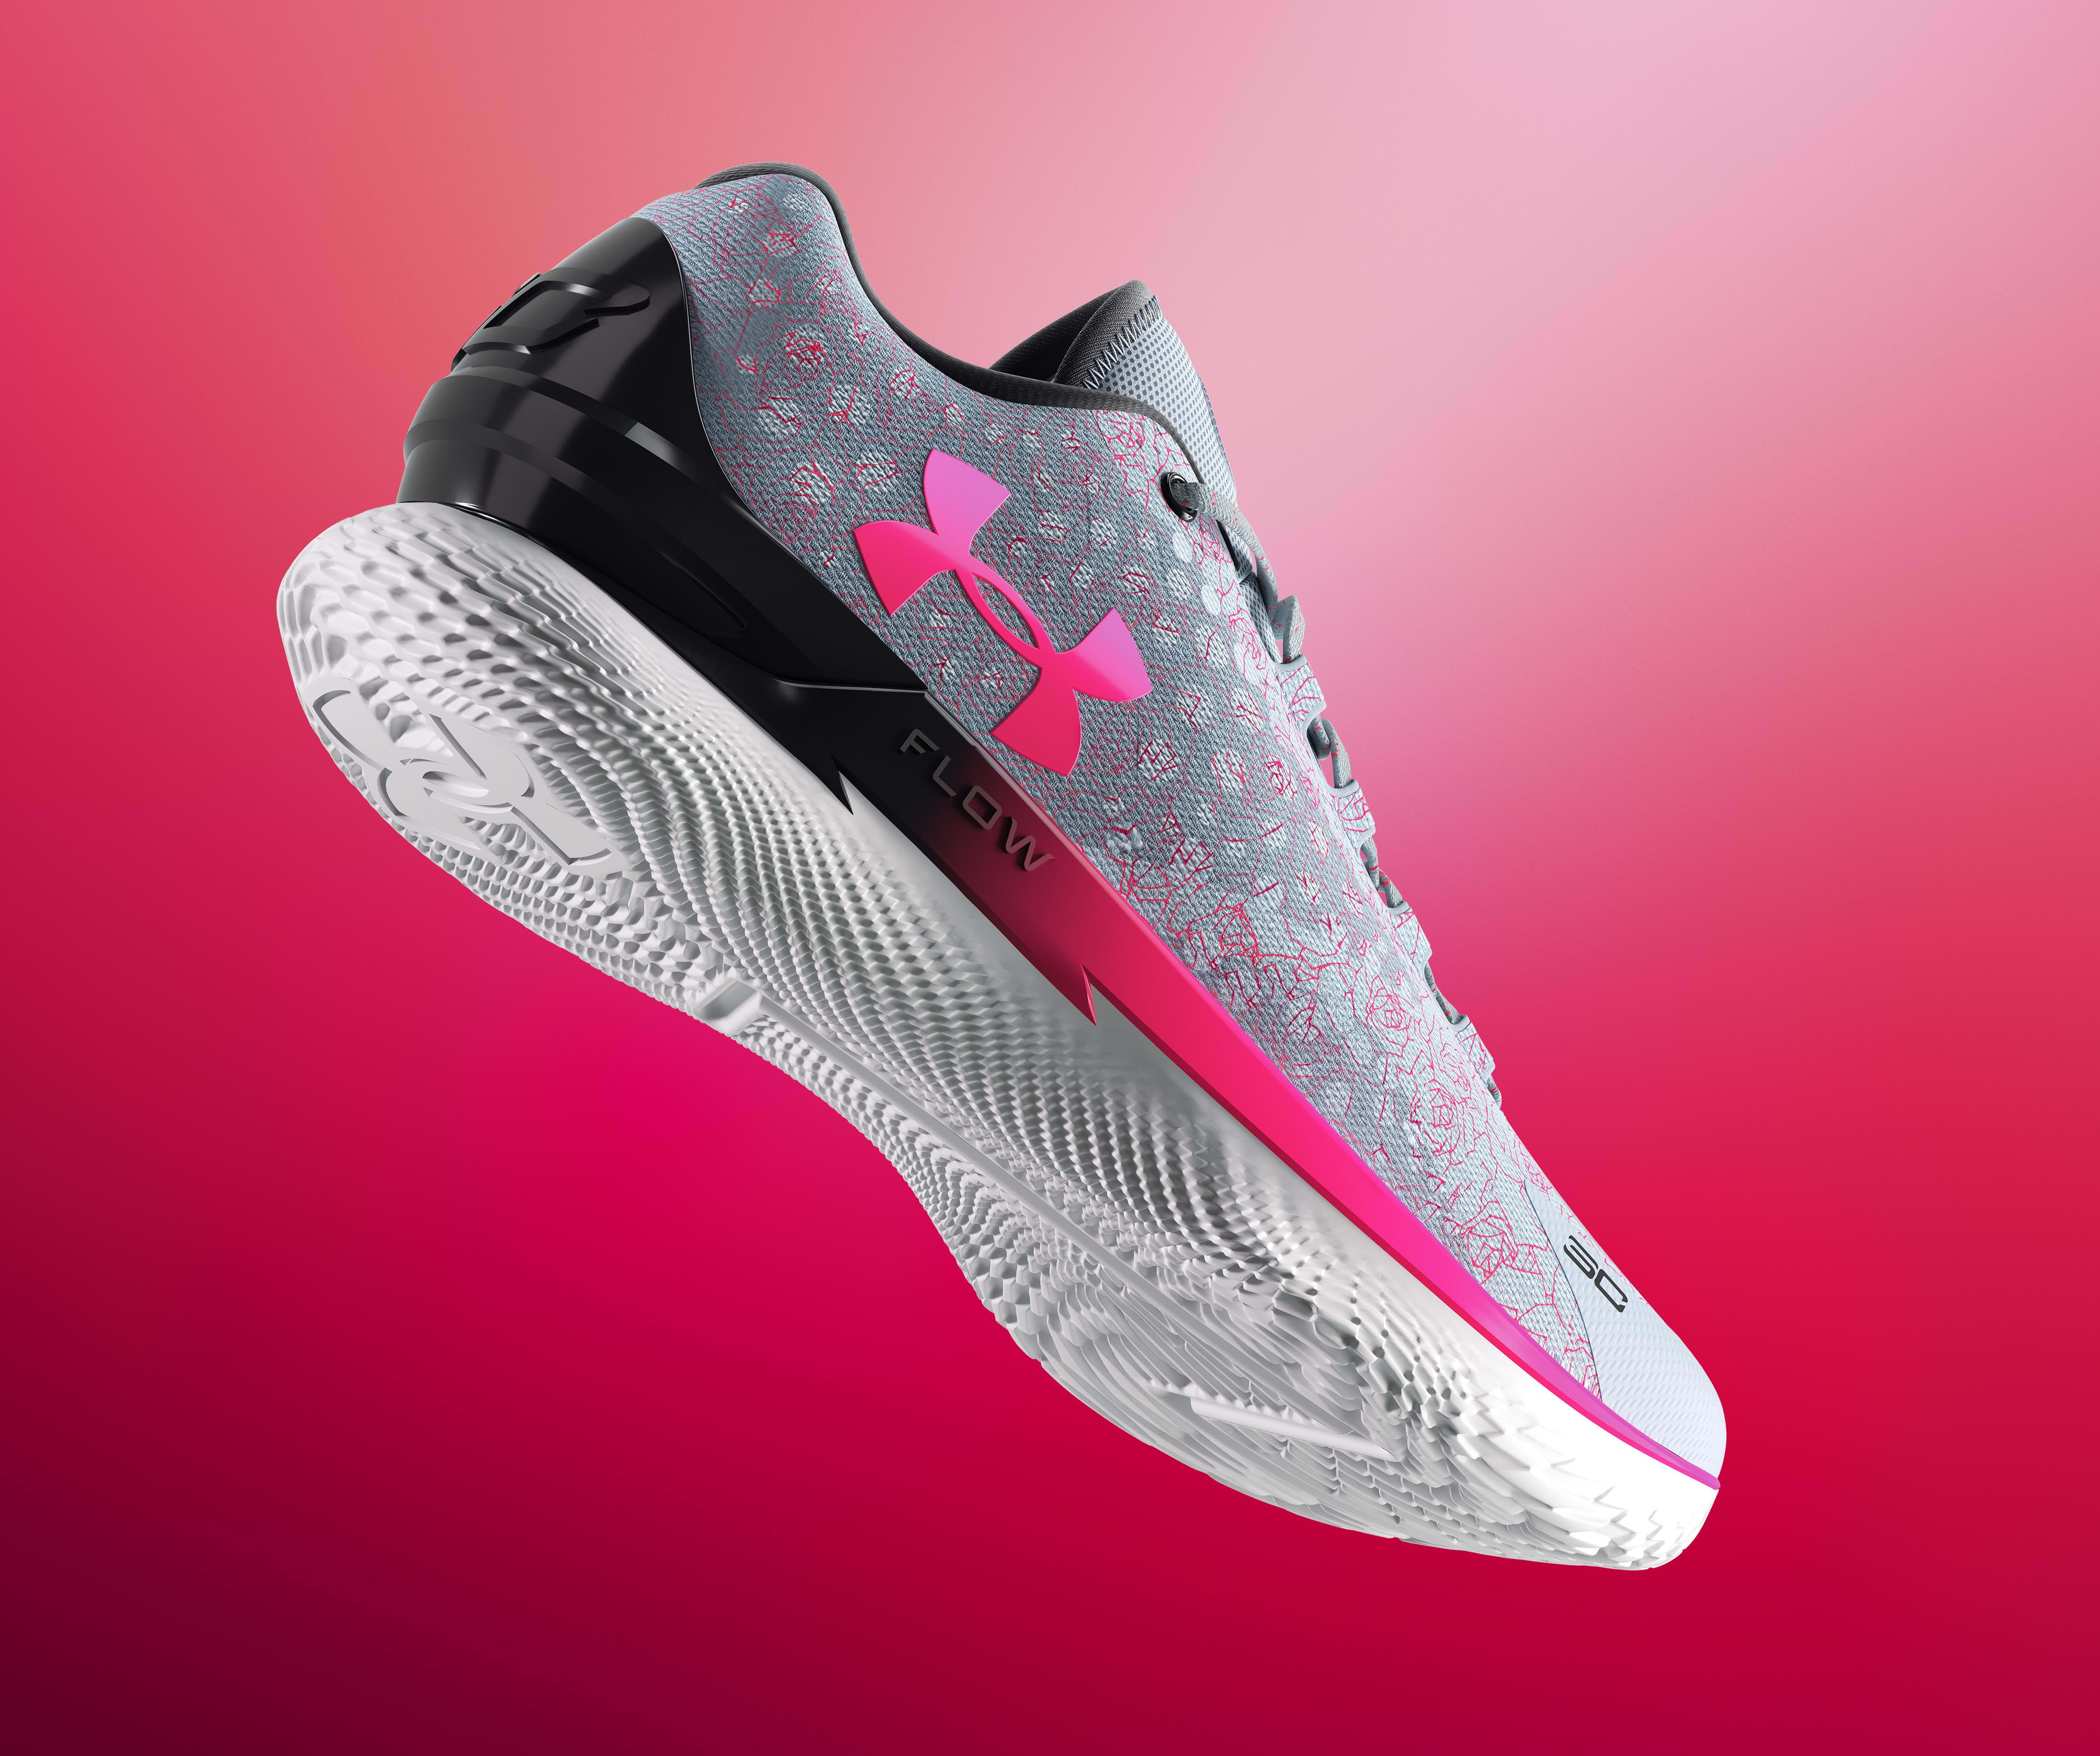 Under Armour Curry 1 FloTro 'Mother's Day' Lateral